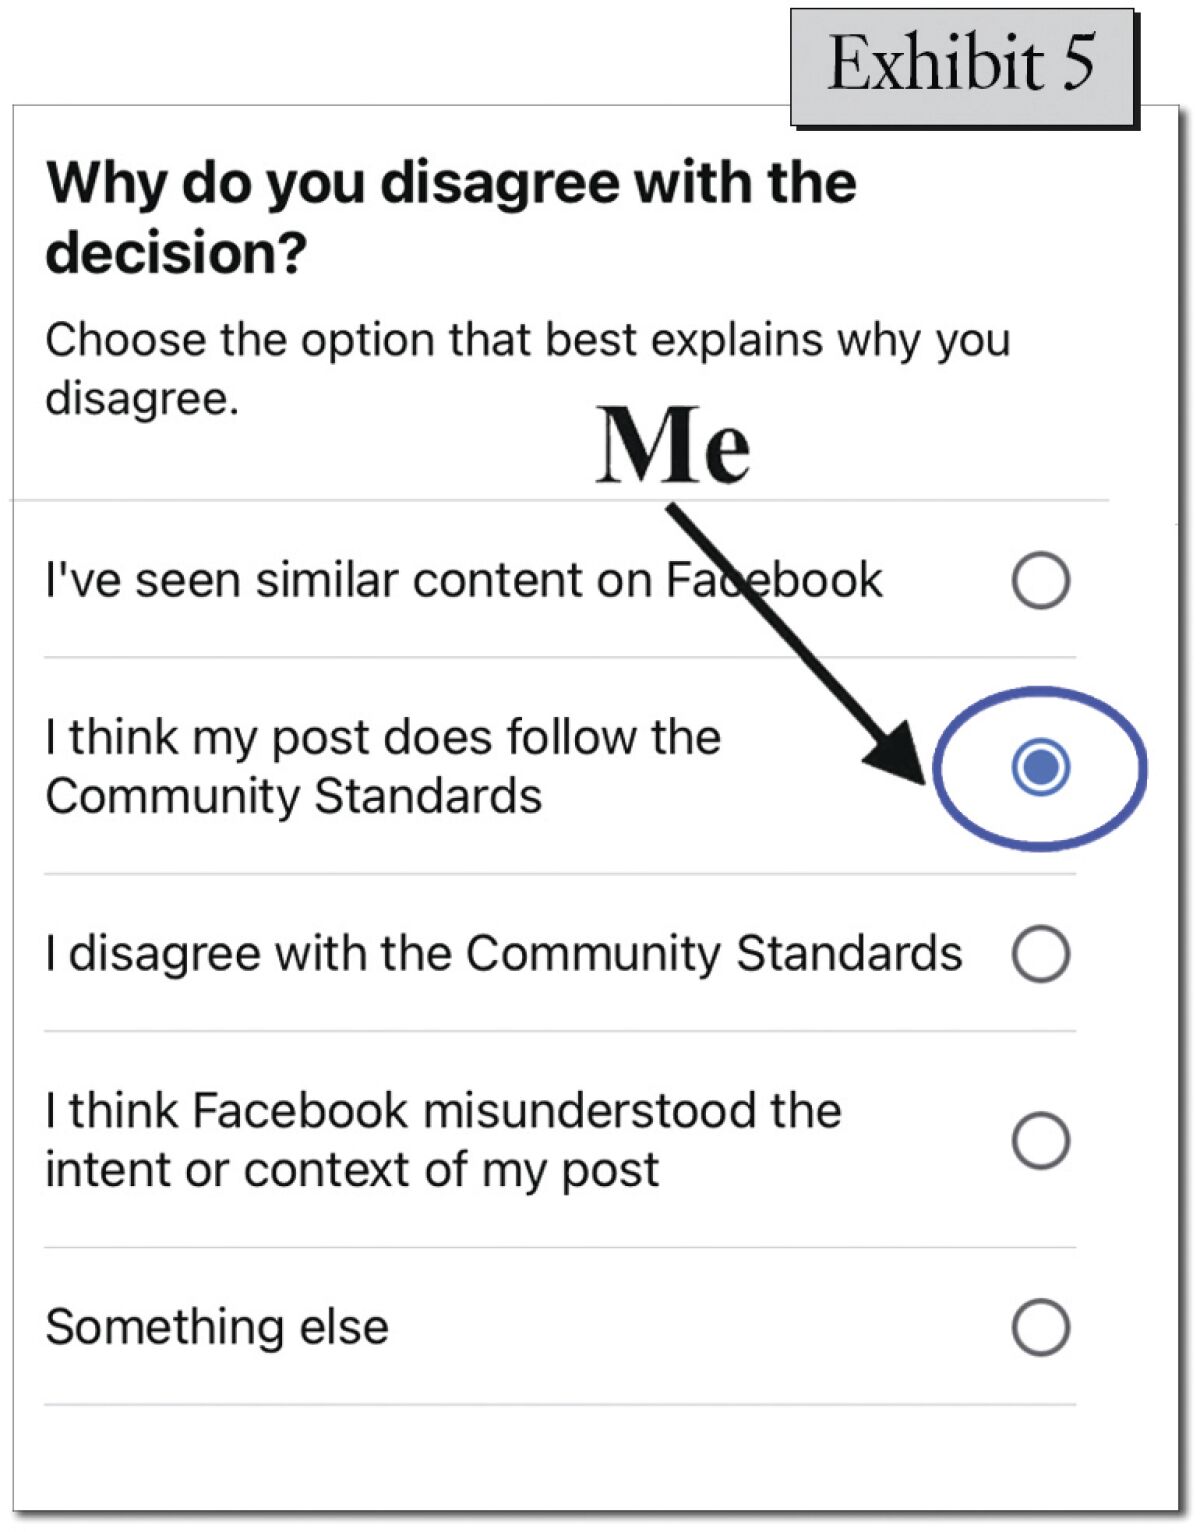 Screenshot by David Chartrand of a Facebook notification "Why do you disagree with the decision?"